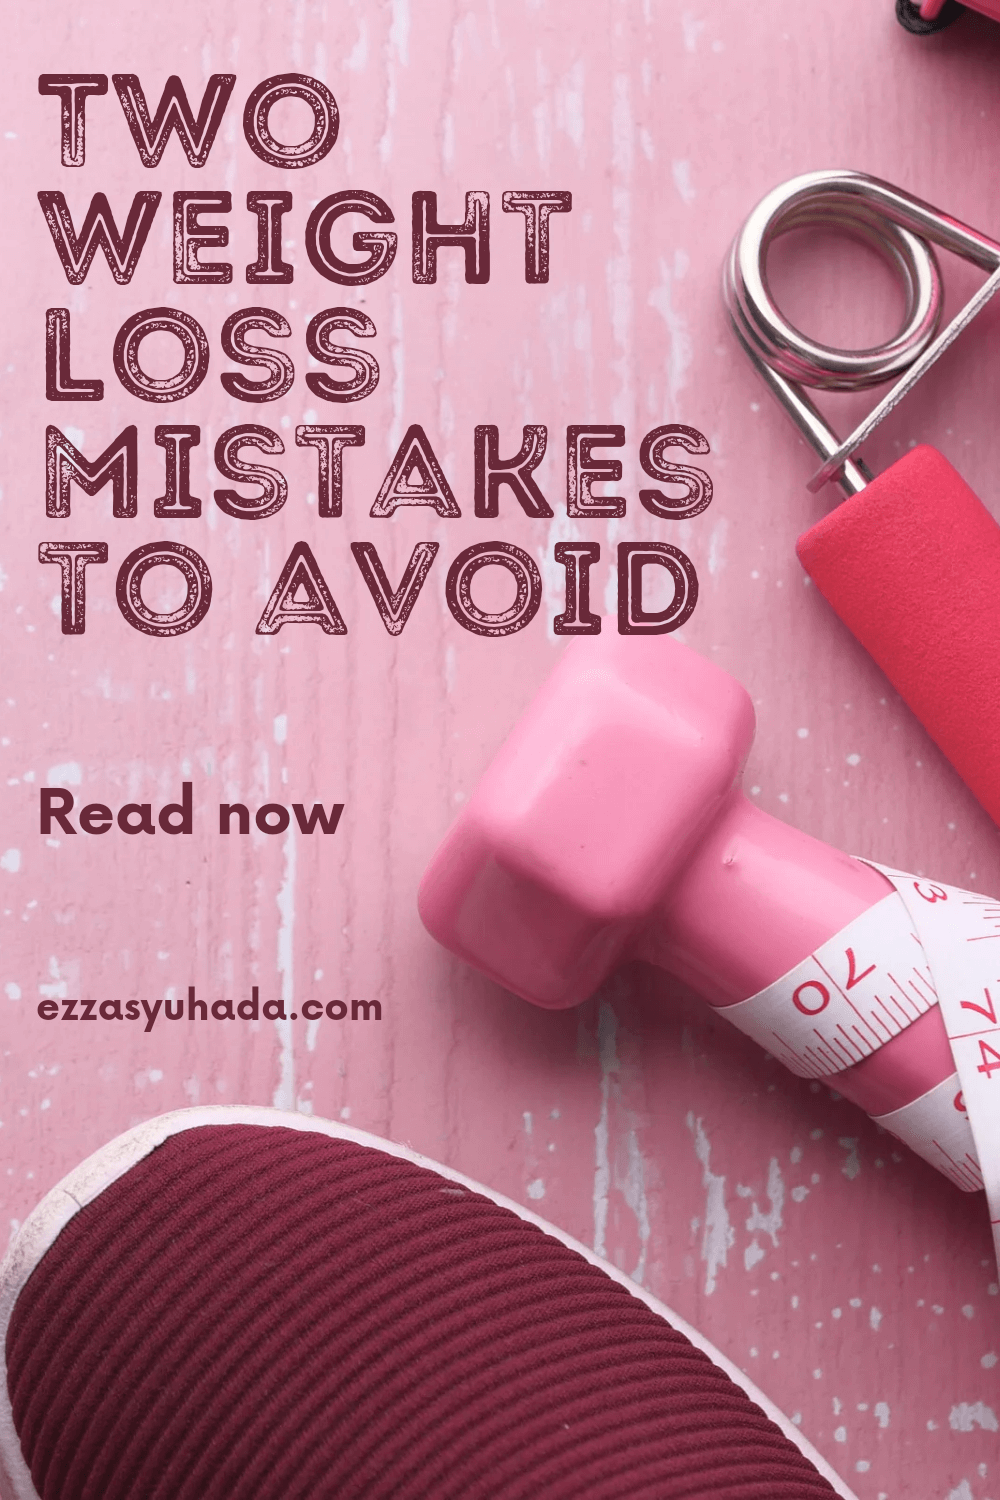 TWO MAJOR WEIGHT LOSS MISTAKES YOU SHOULD AVOID!